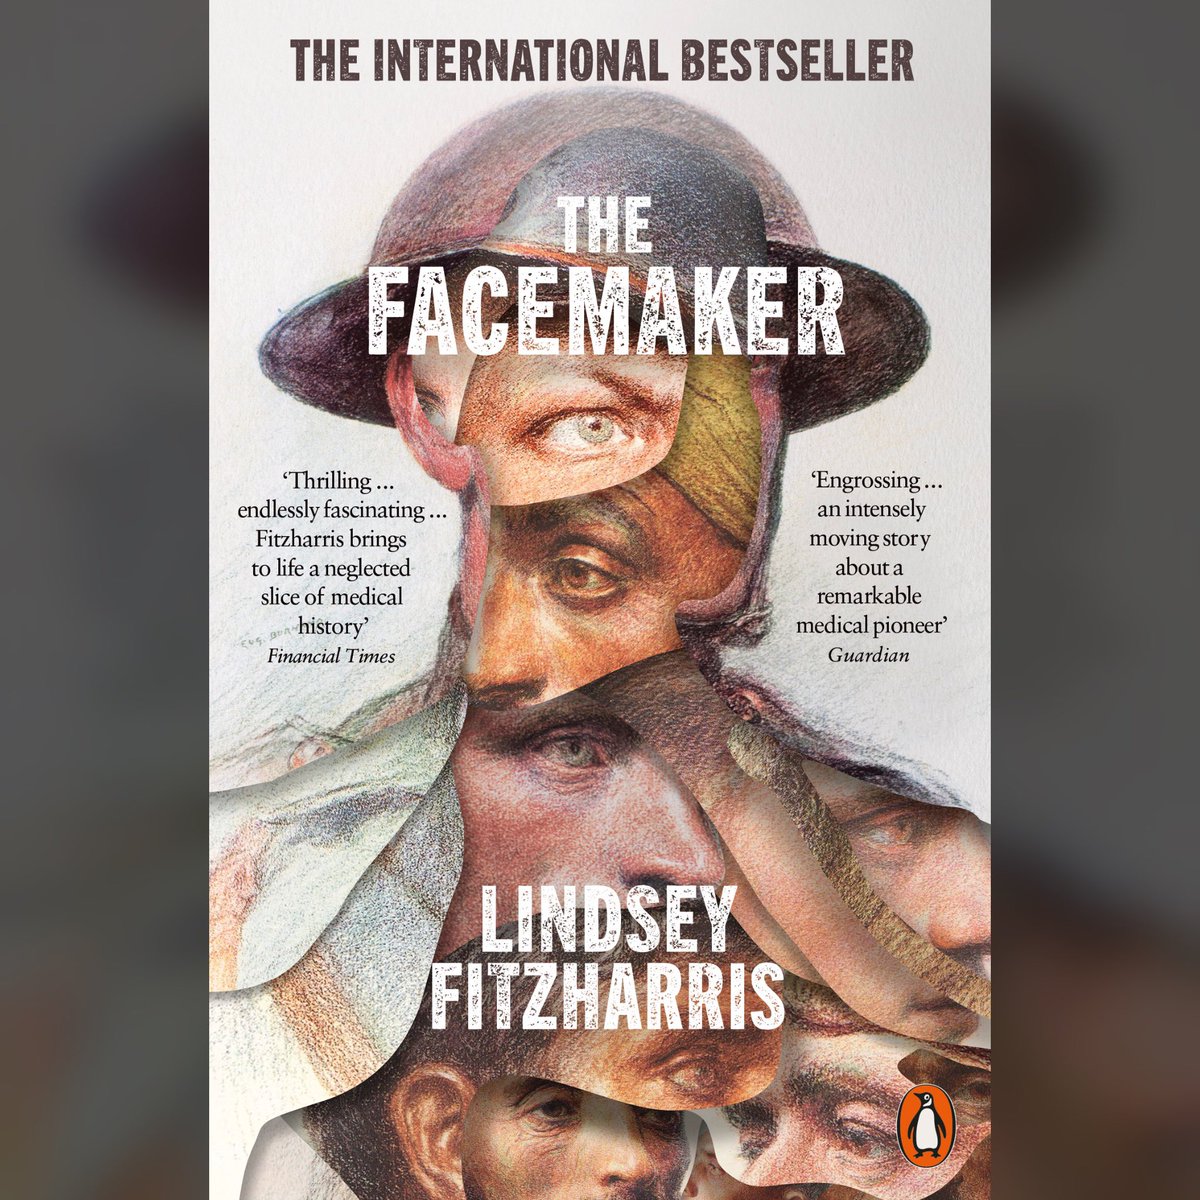 THE FACEMAKER is out today in paperback! 🇬🇧 It tells the poignant story of the visionary surgeon who rebuilt the faces of the WWI's injured heroes, and in the process ushered in the modern era of plastic surgery. I'd be grateful for your support: amzn.to/442MiS5